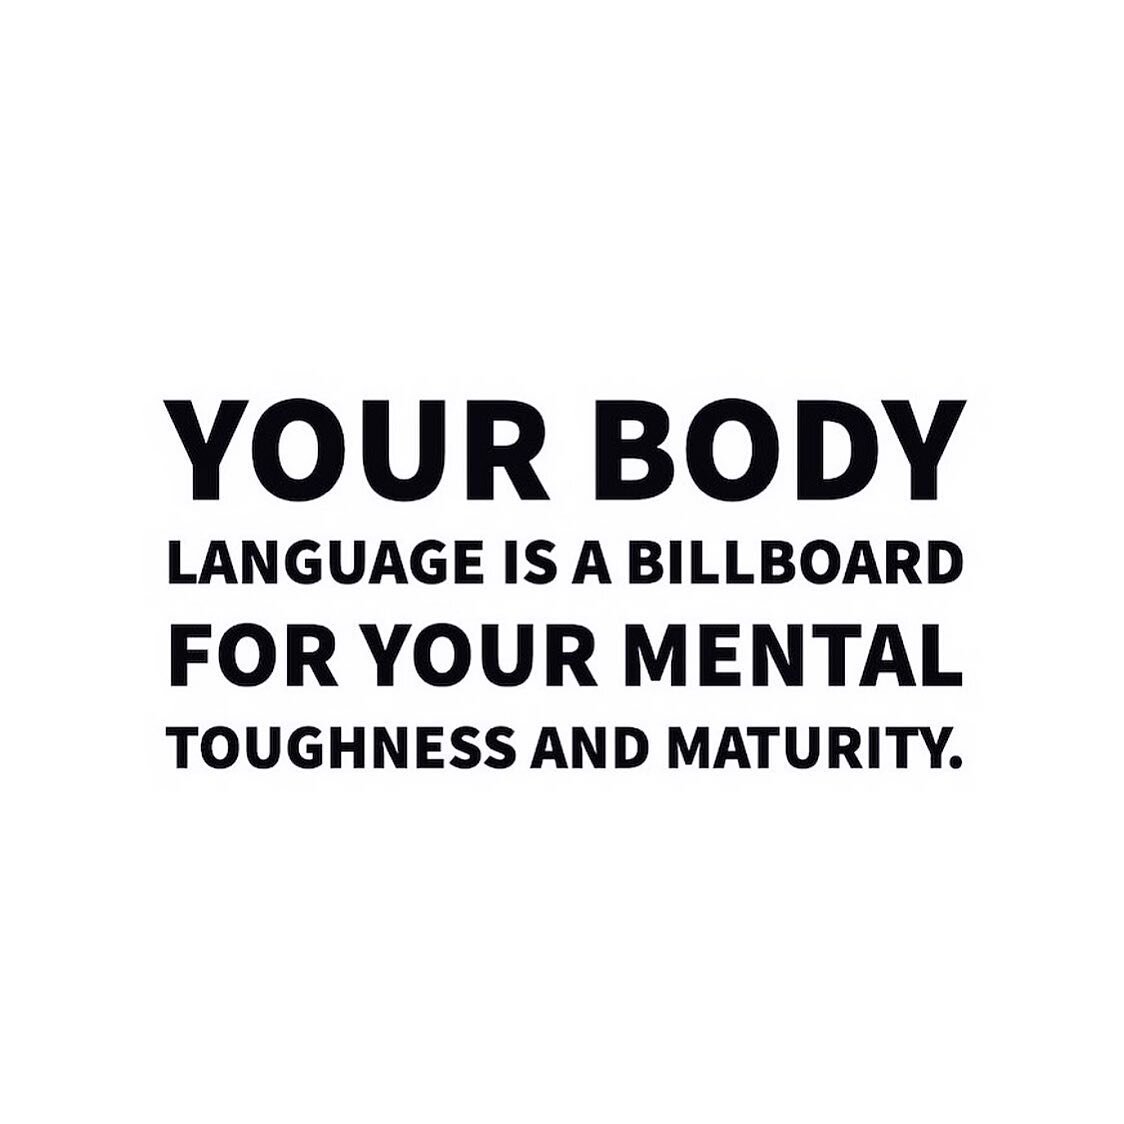 Facts.

@theempoweredplayer has a zero tolerance policy for poor body language. Trust me when I say, your body language speaks VOLUMES.